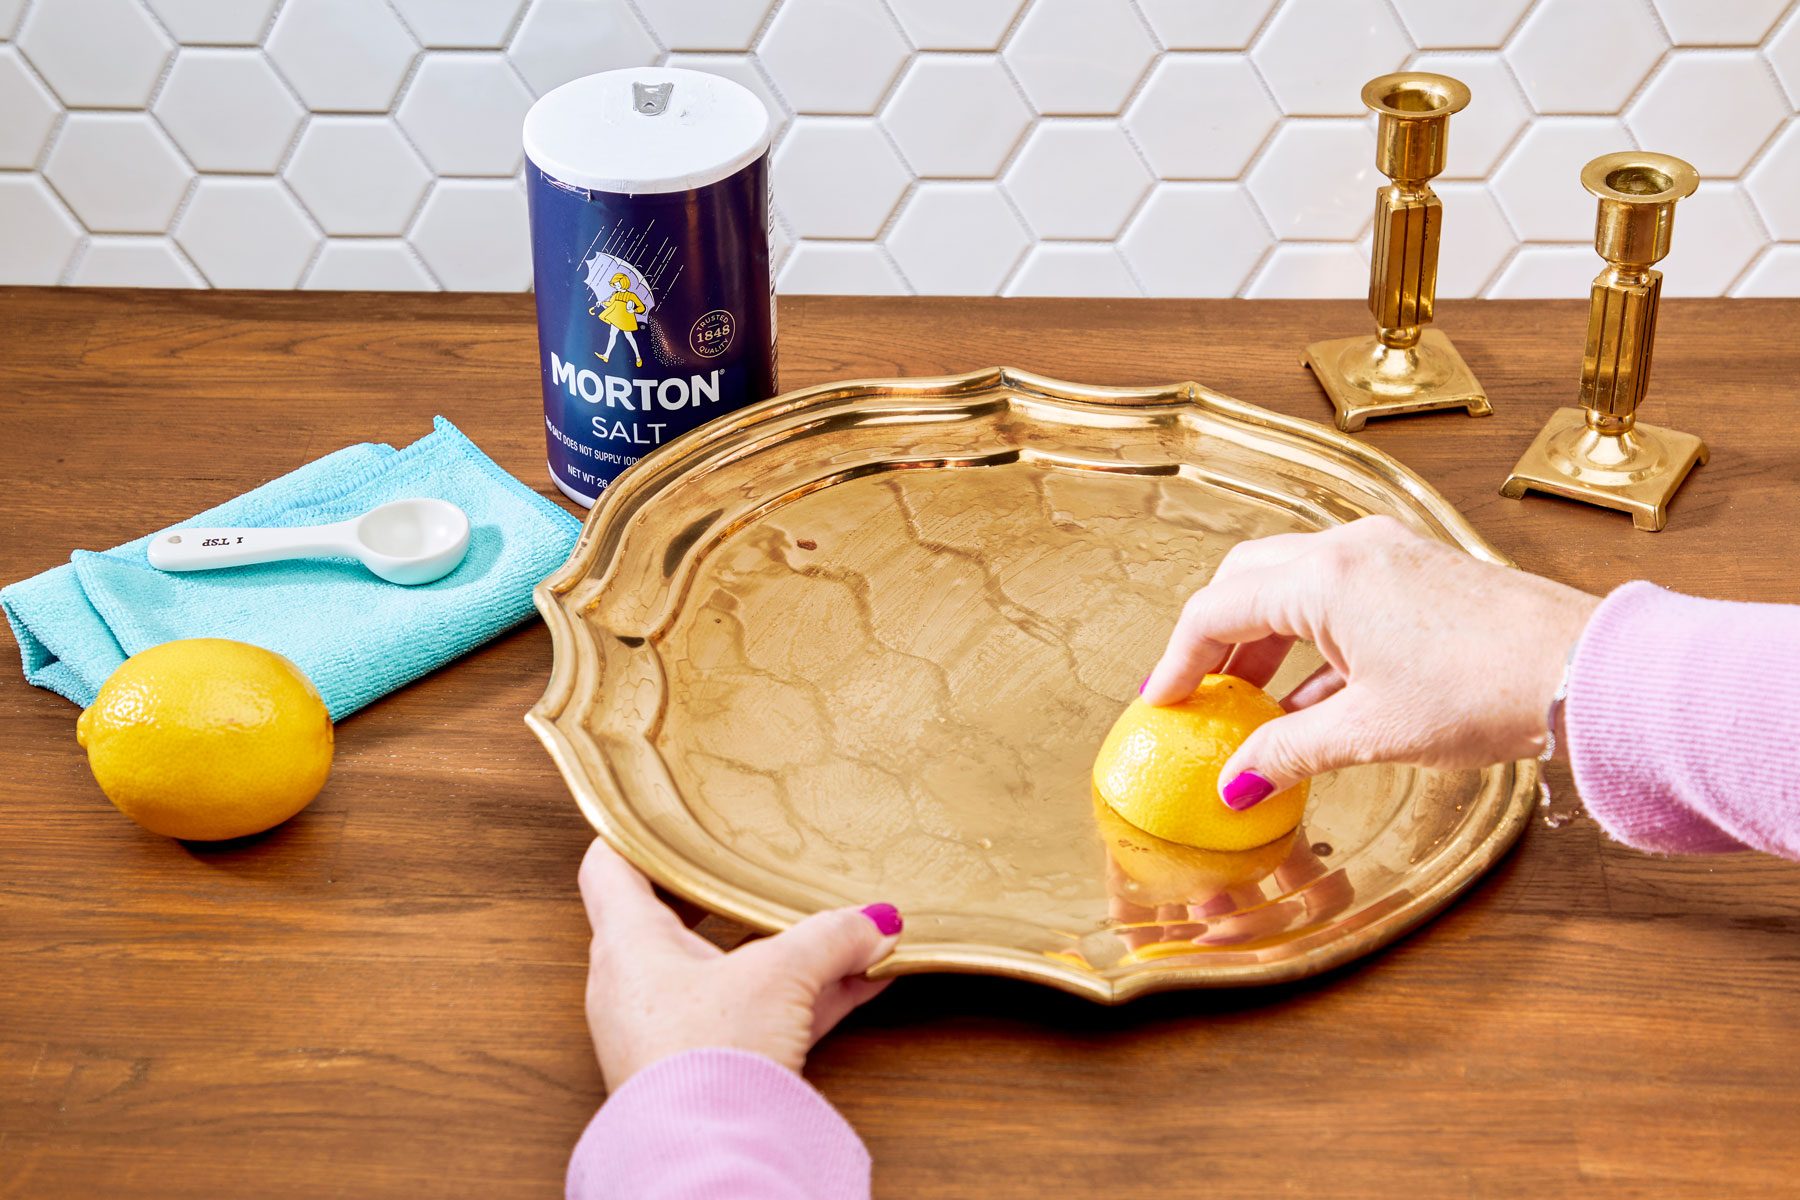 How to Clean Brass: 4 Ways to Clean Brass Hardware, Fixtures & More